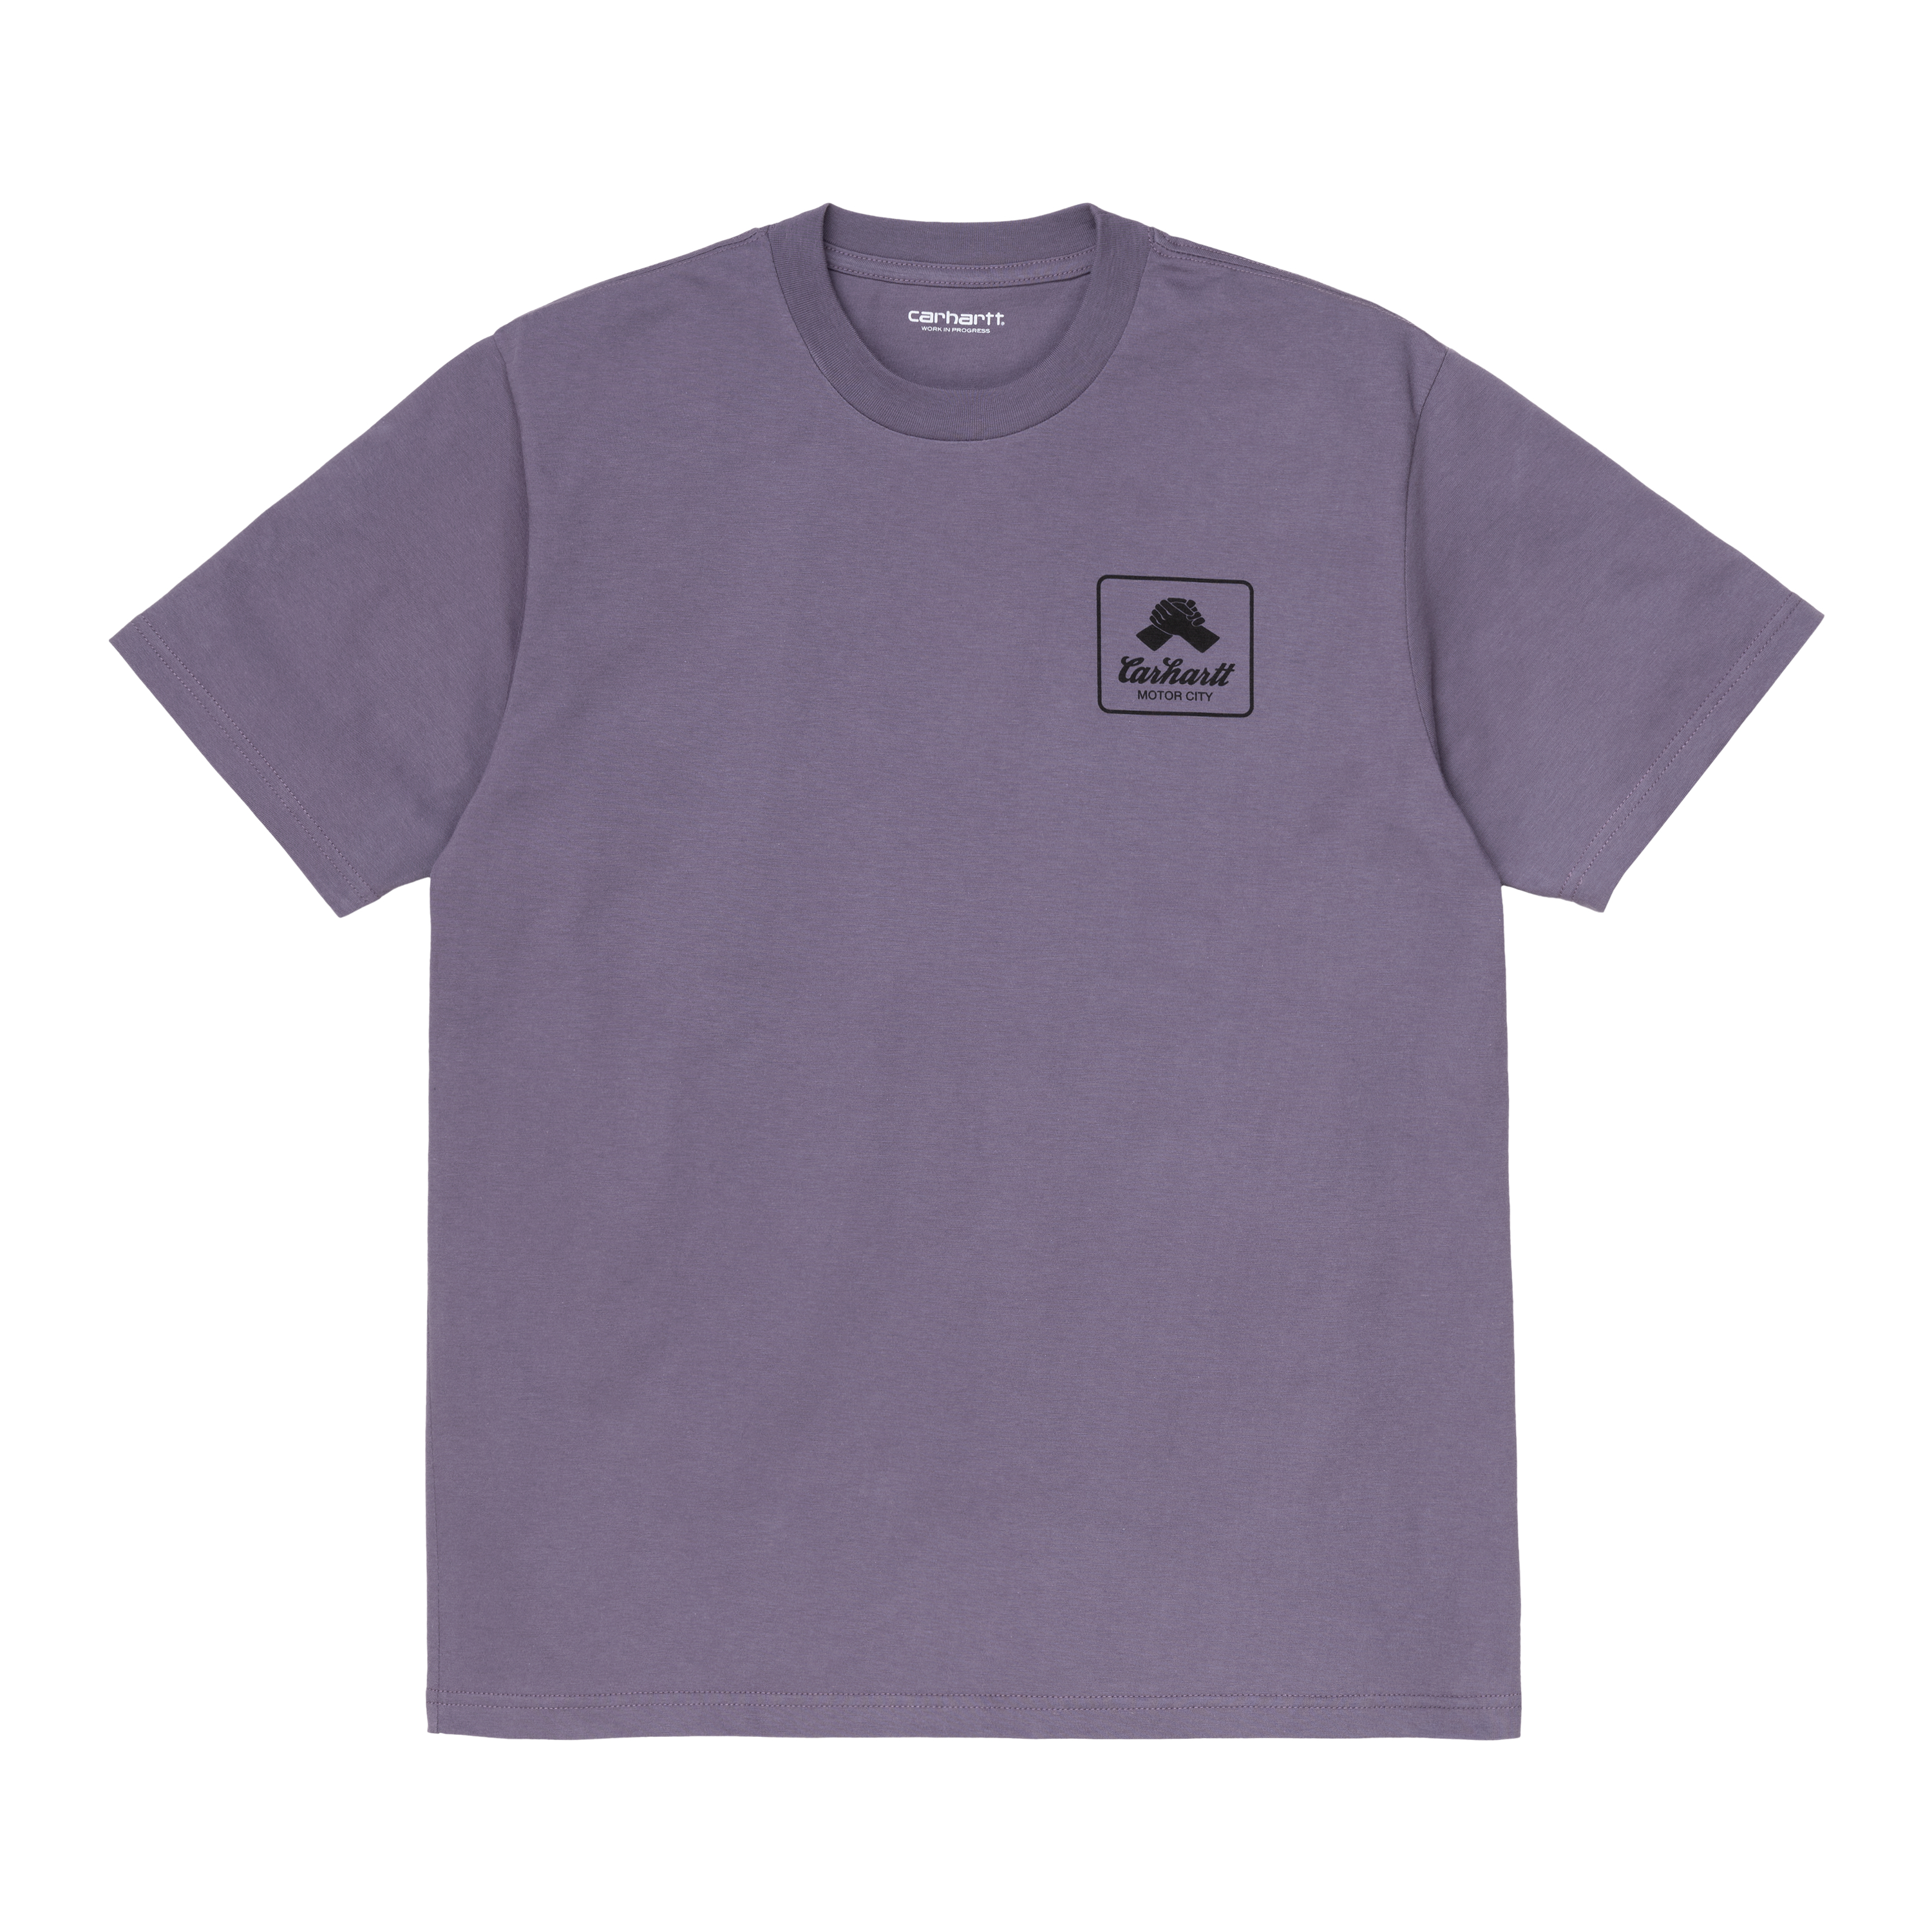  S/S Peace State T-shirt